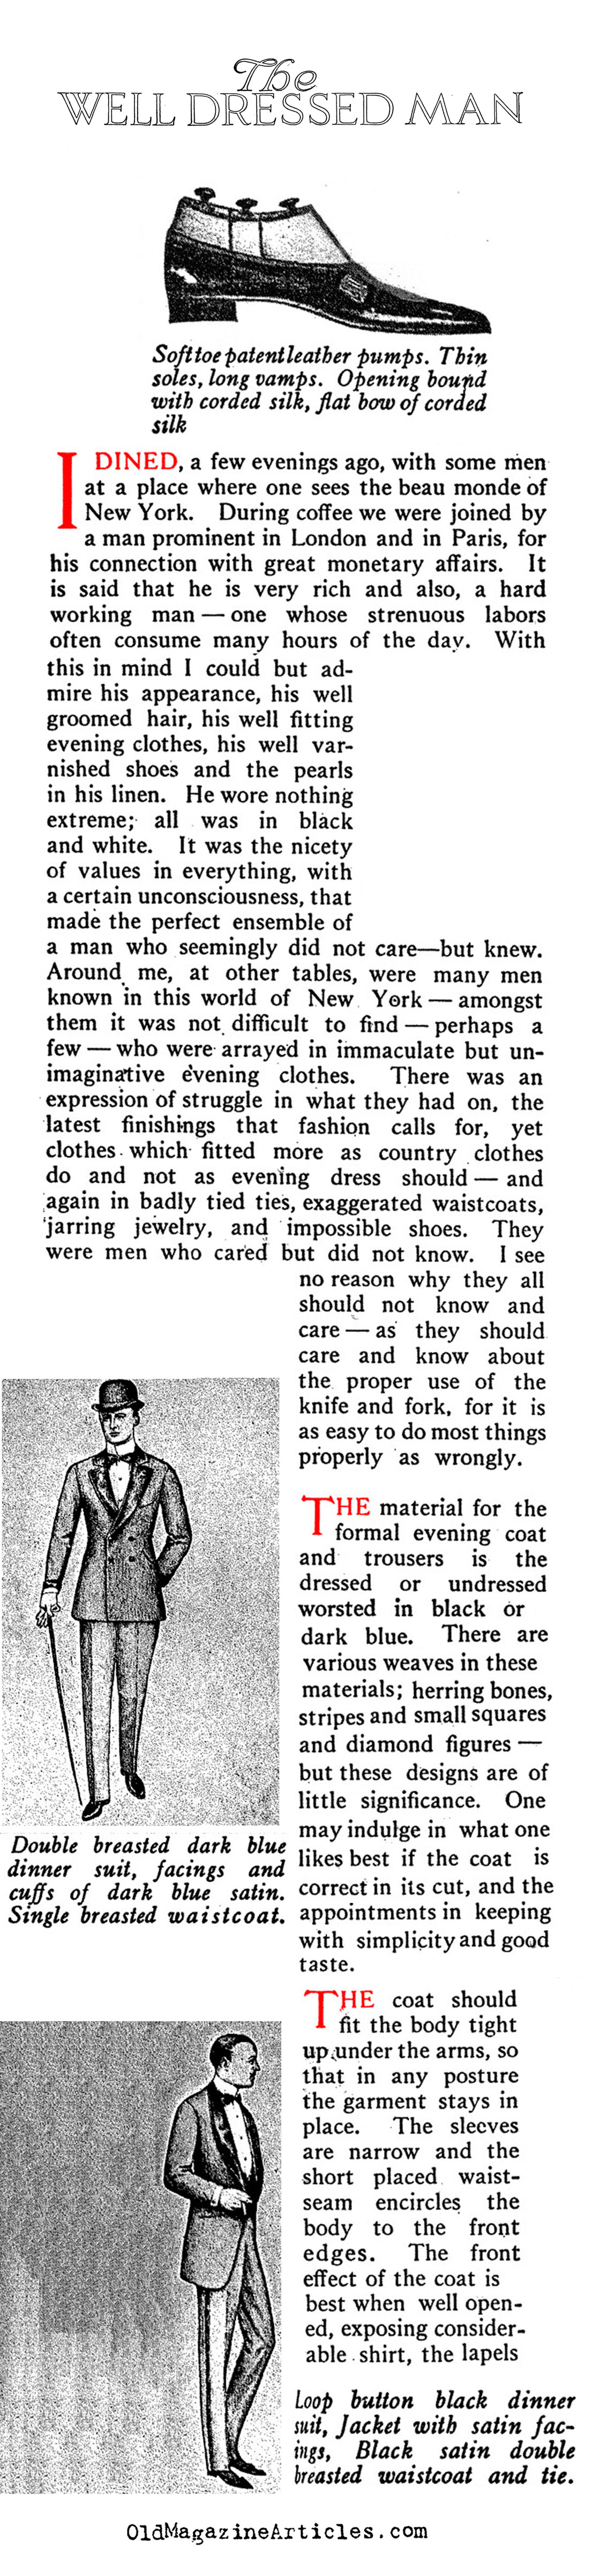 How Did the Men in First Class Dress for Dinner?  (Vanity Fair, 1913)